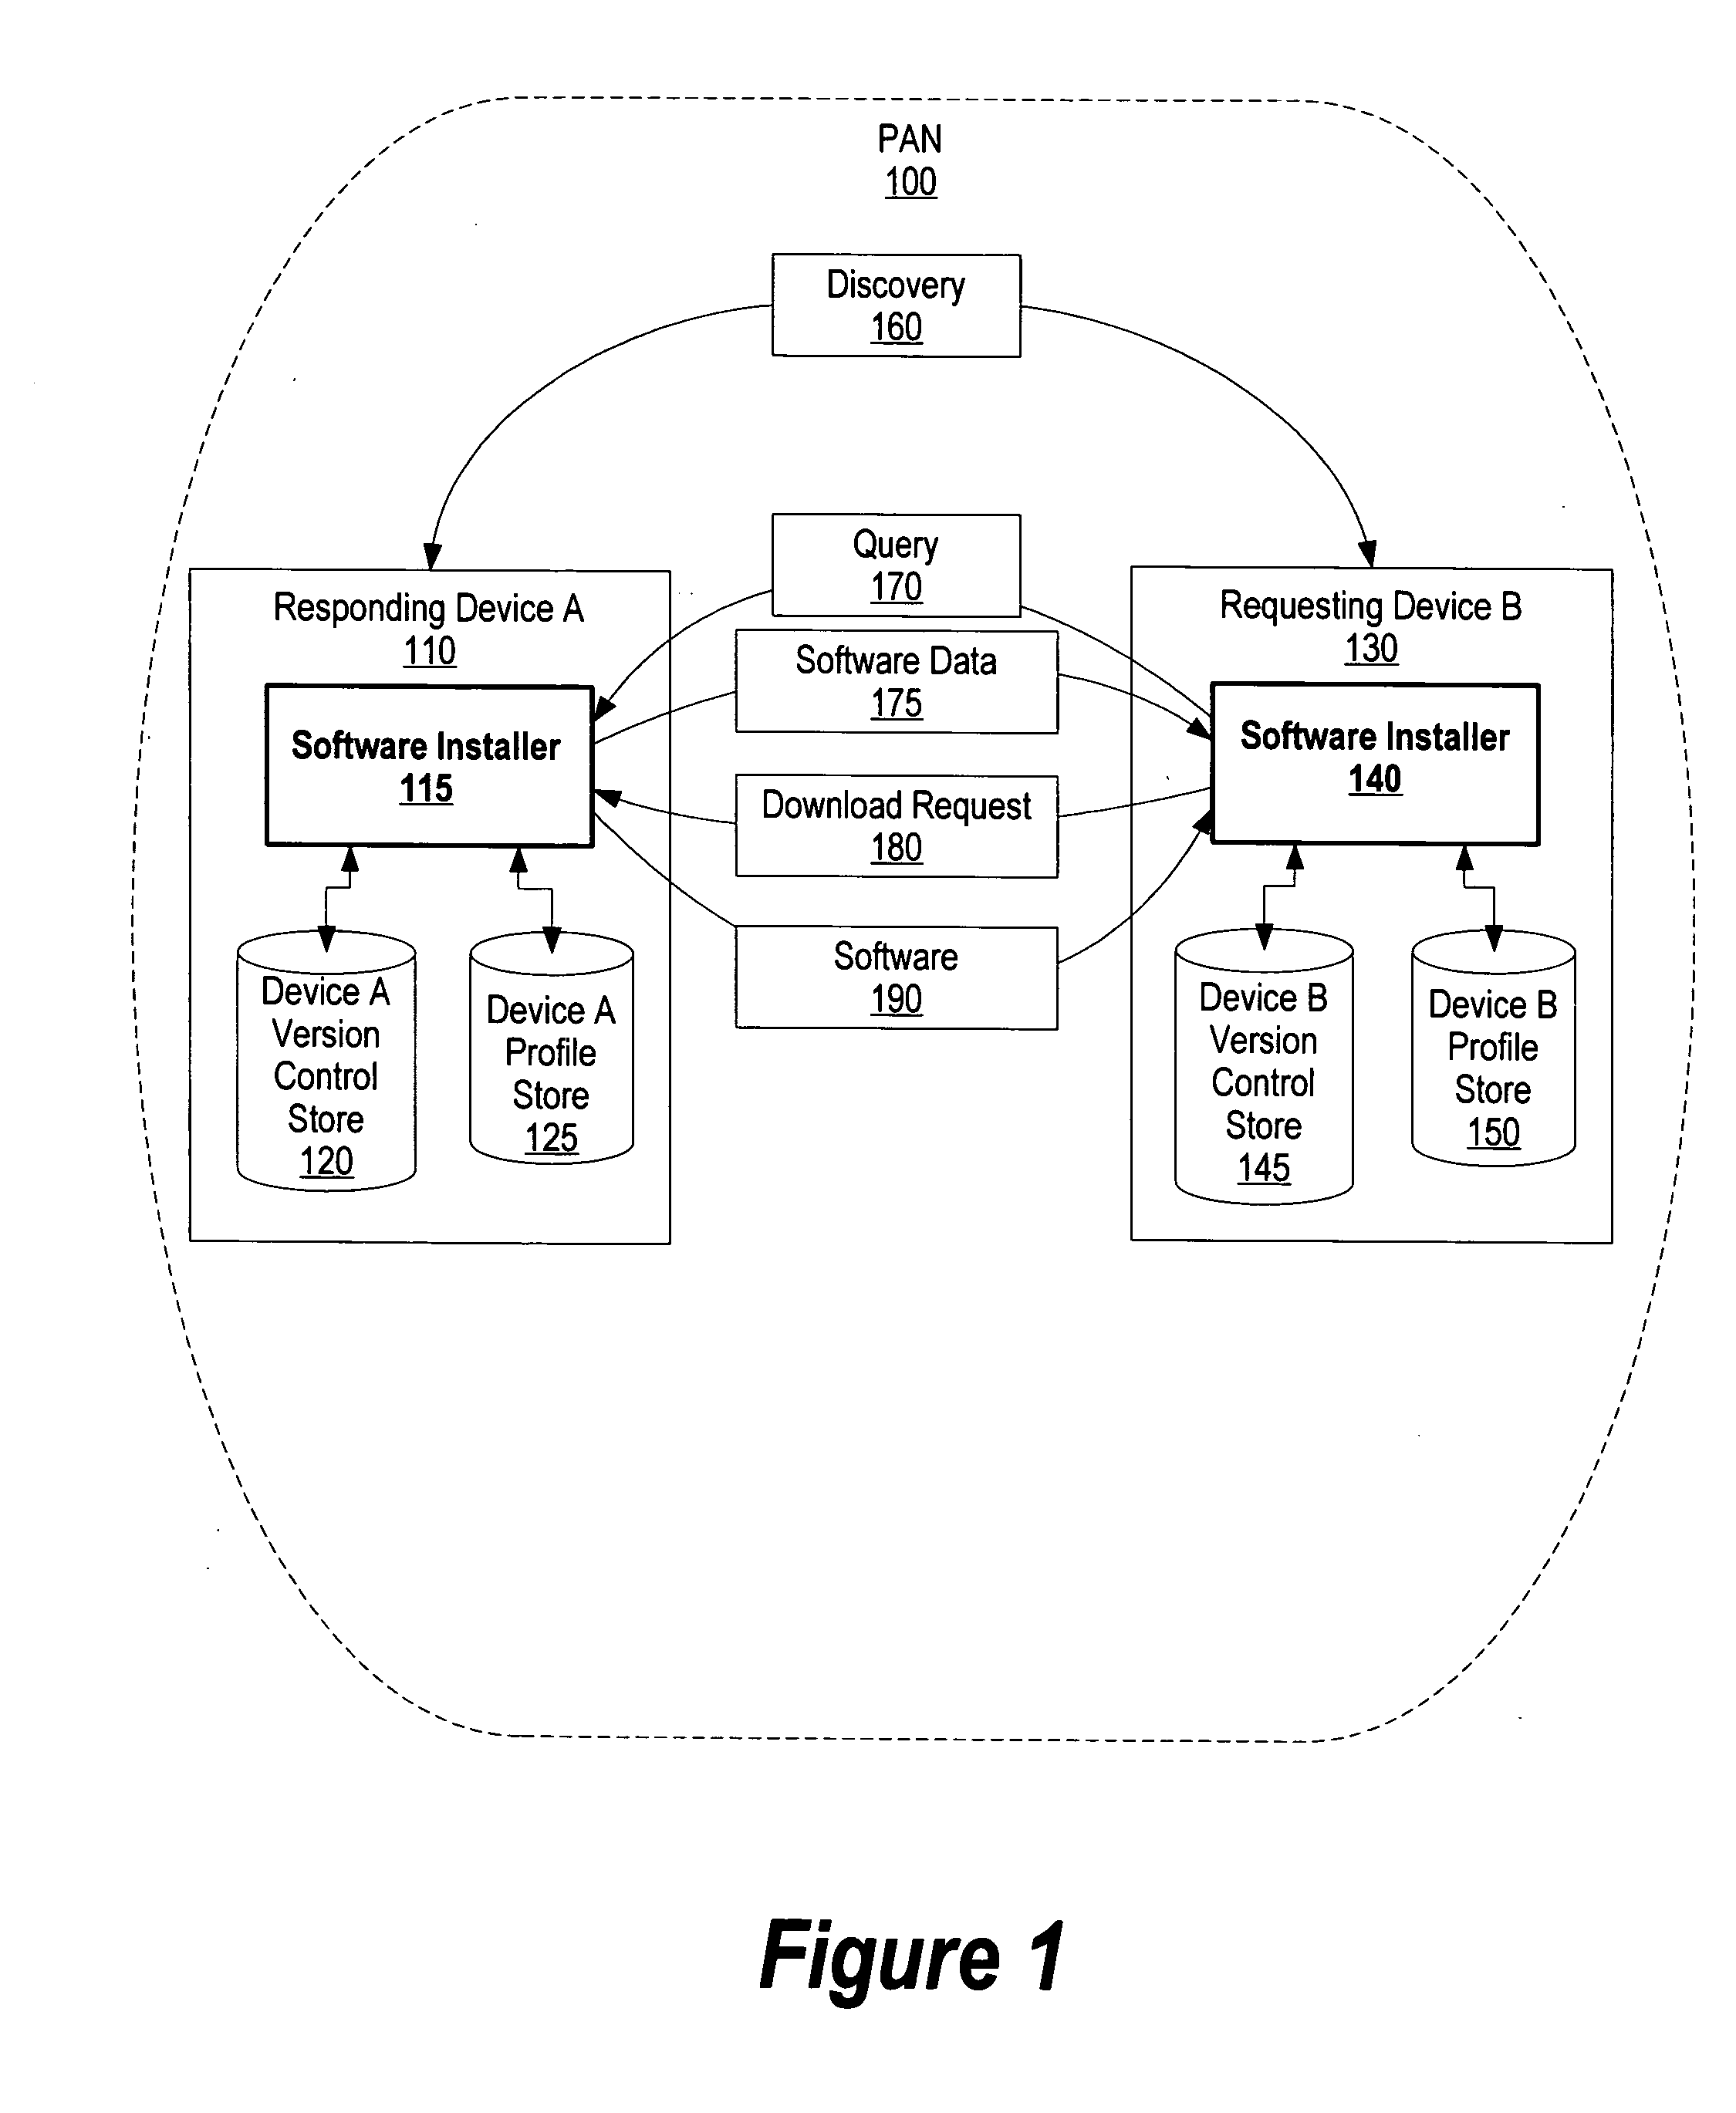 System and method for autonomic software delivery for personal area networks